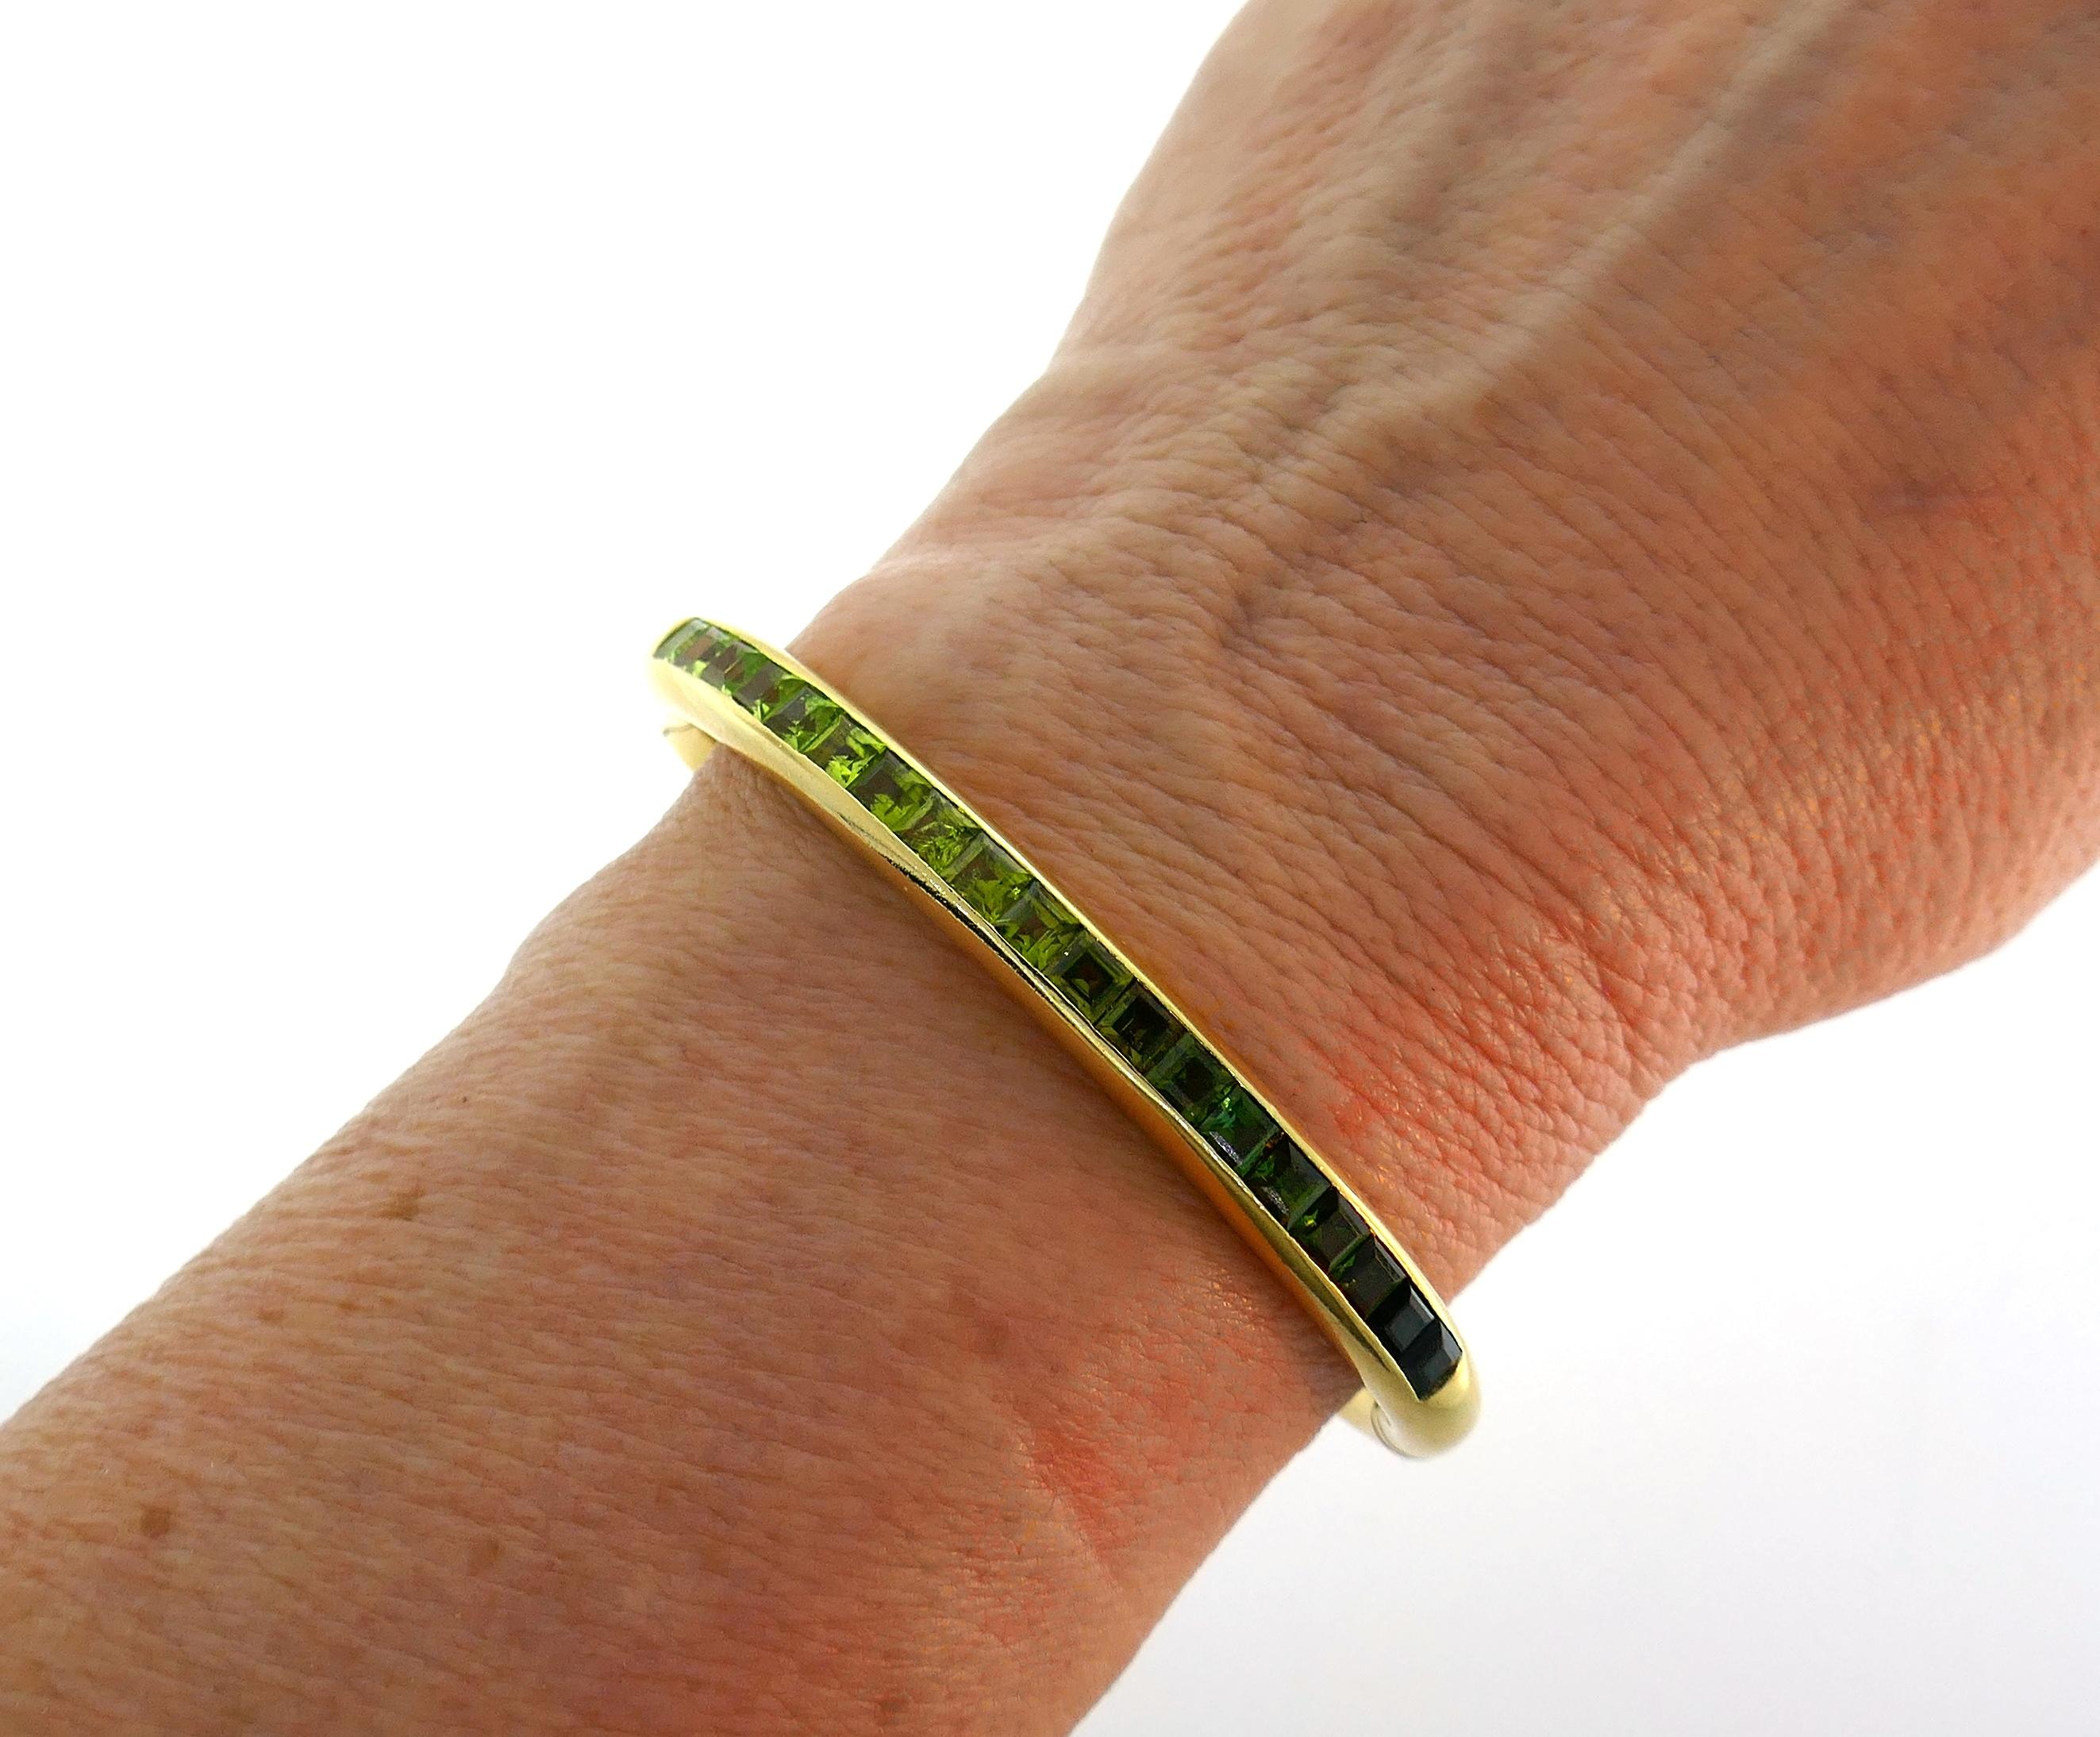 Chic bangle bracelet created by Bvlgari in Italy in the 1980s. Tastefully selected green-hued gemstones with light green through yellowish green to darker bluish green make you keep looking and admiring the bracelet. Elegant and wearable, the bangle